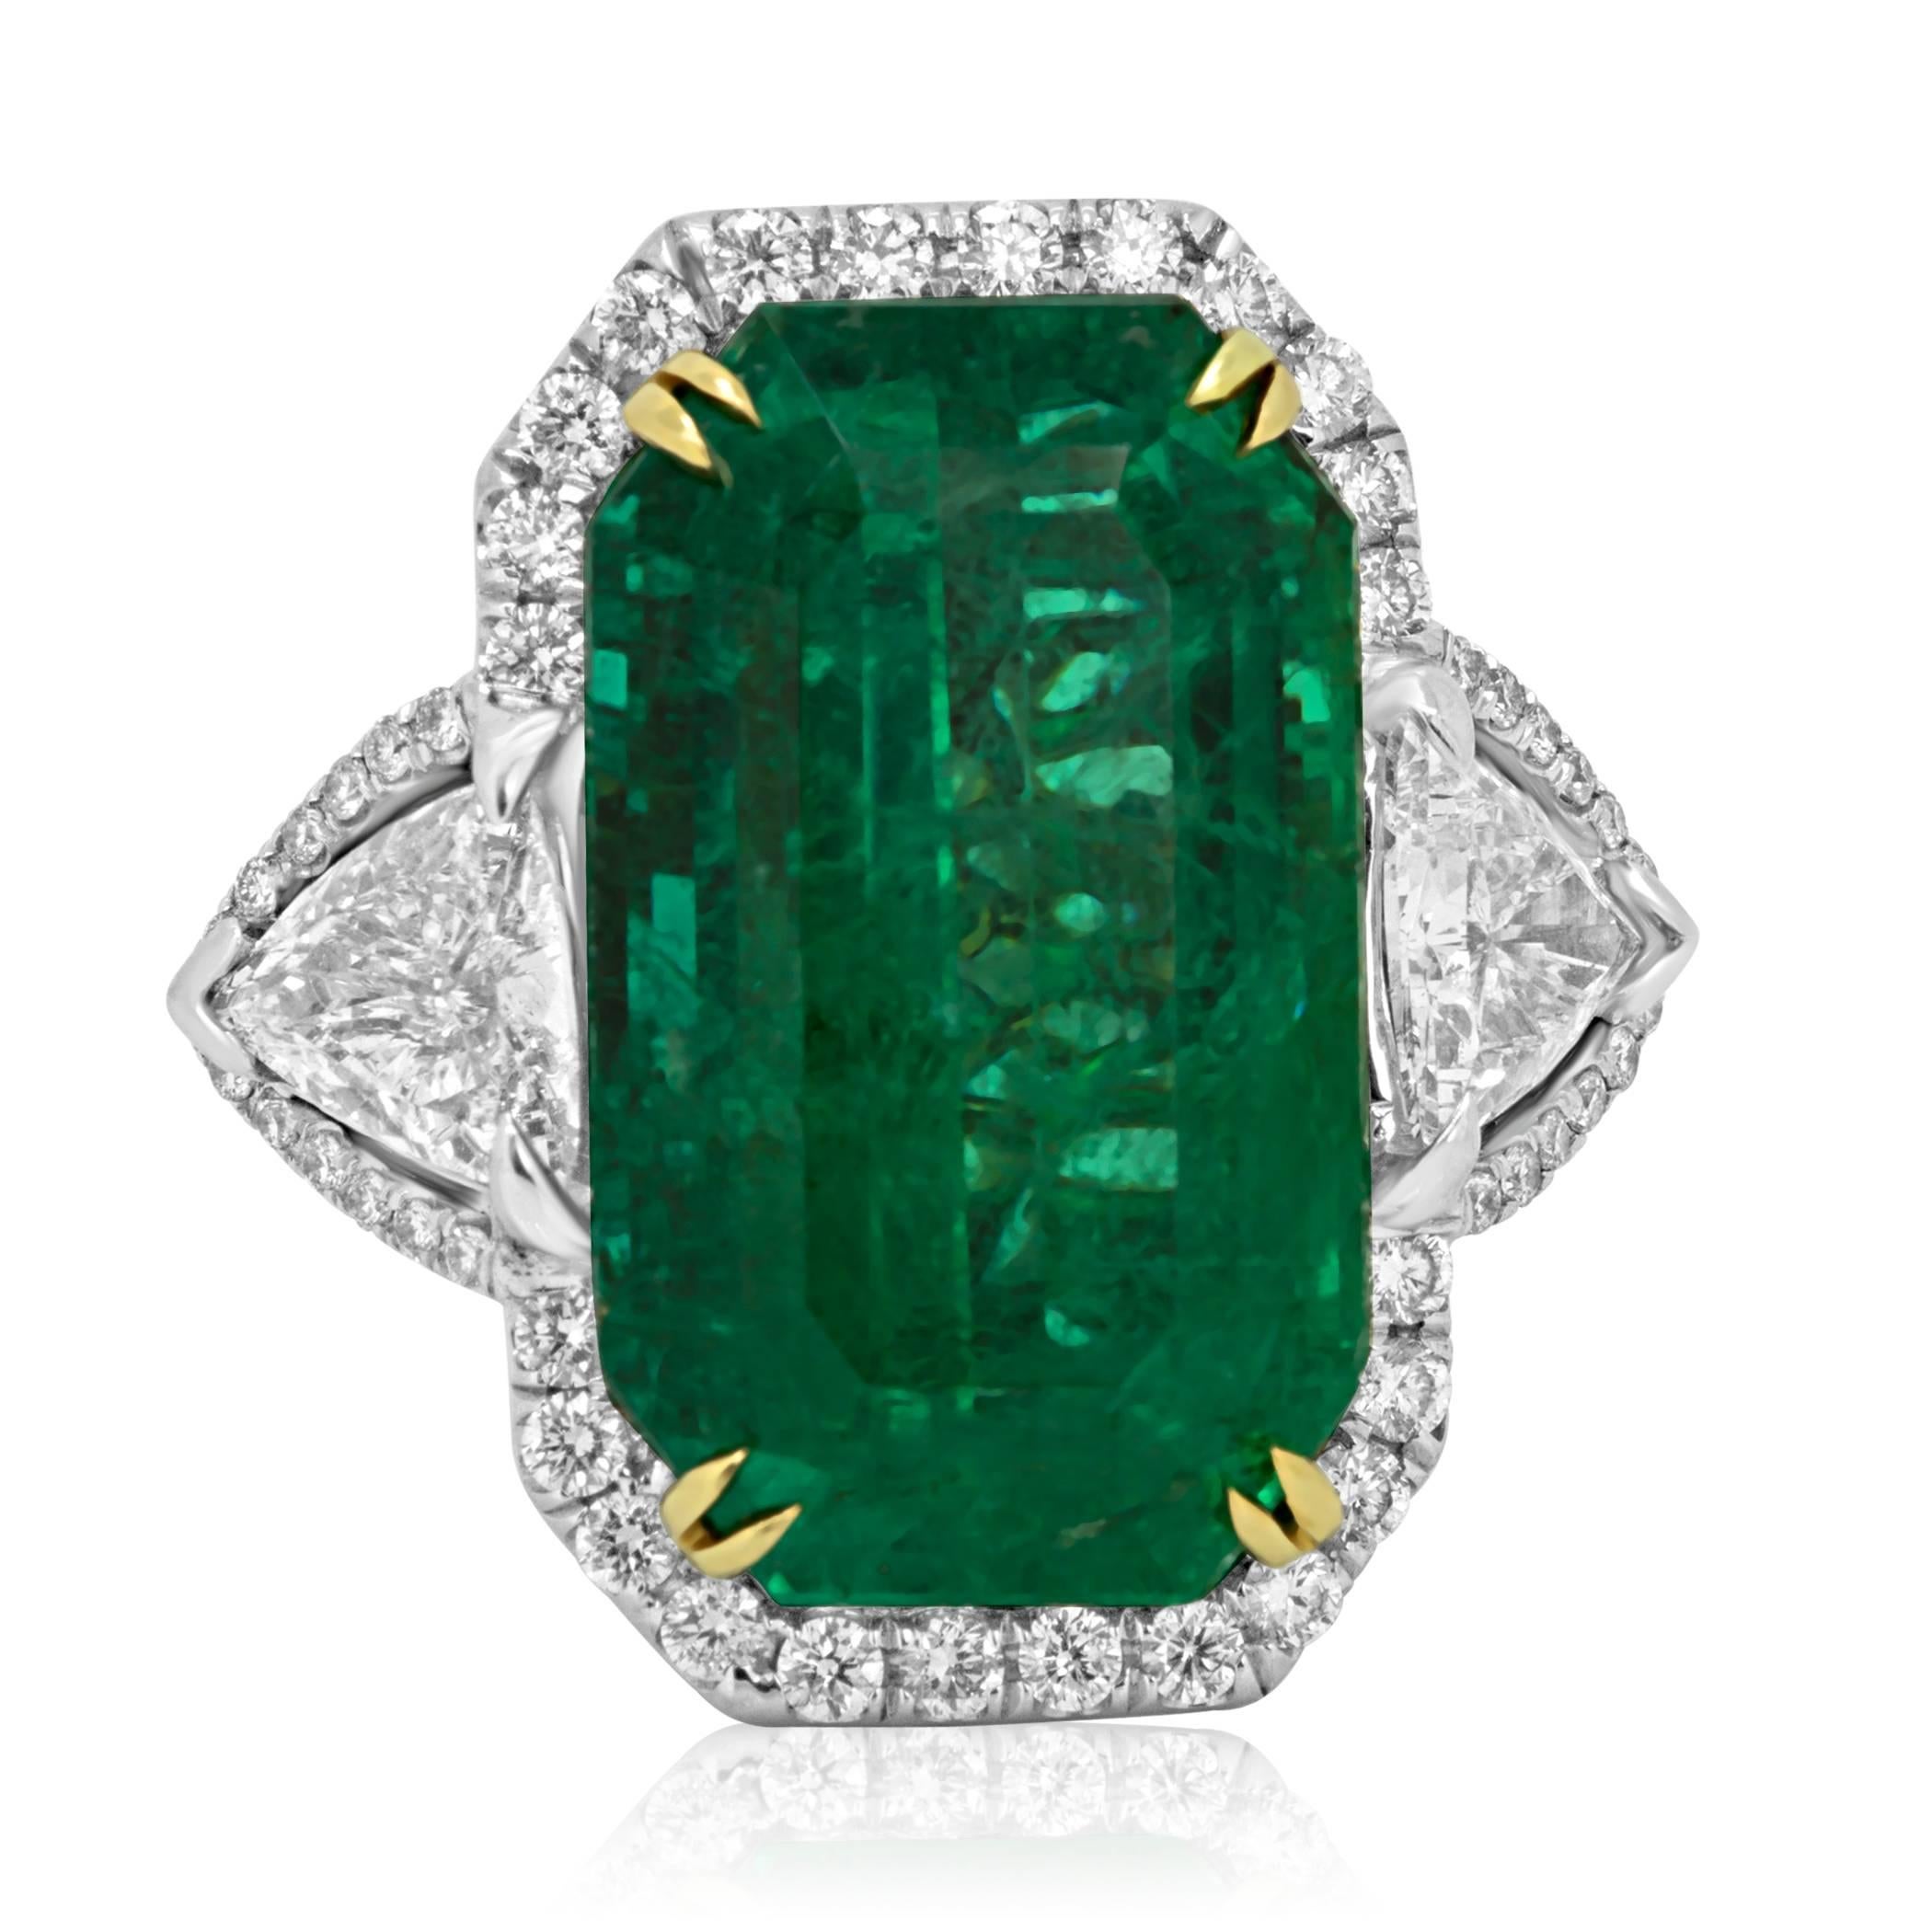 Stunning One of a kind GIA certified 12.40 Carat Emerald cut Zambian Emerald Flanked with 2 White diamond Trillions 1.04 Carat Encircled in a Single Halo of White Diamond Rounds 0.66 Carat in Hand Made 18K White and Yellow Gold Cocktail Ring.

MADE